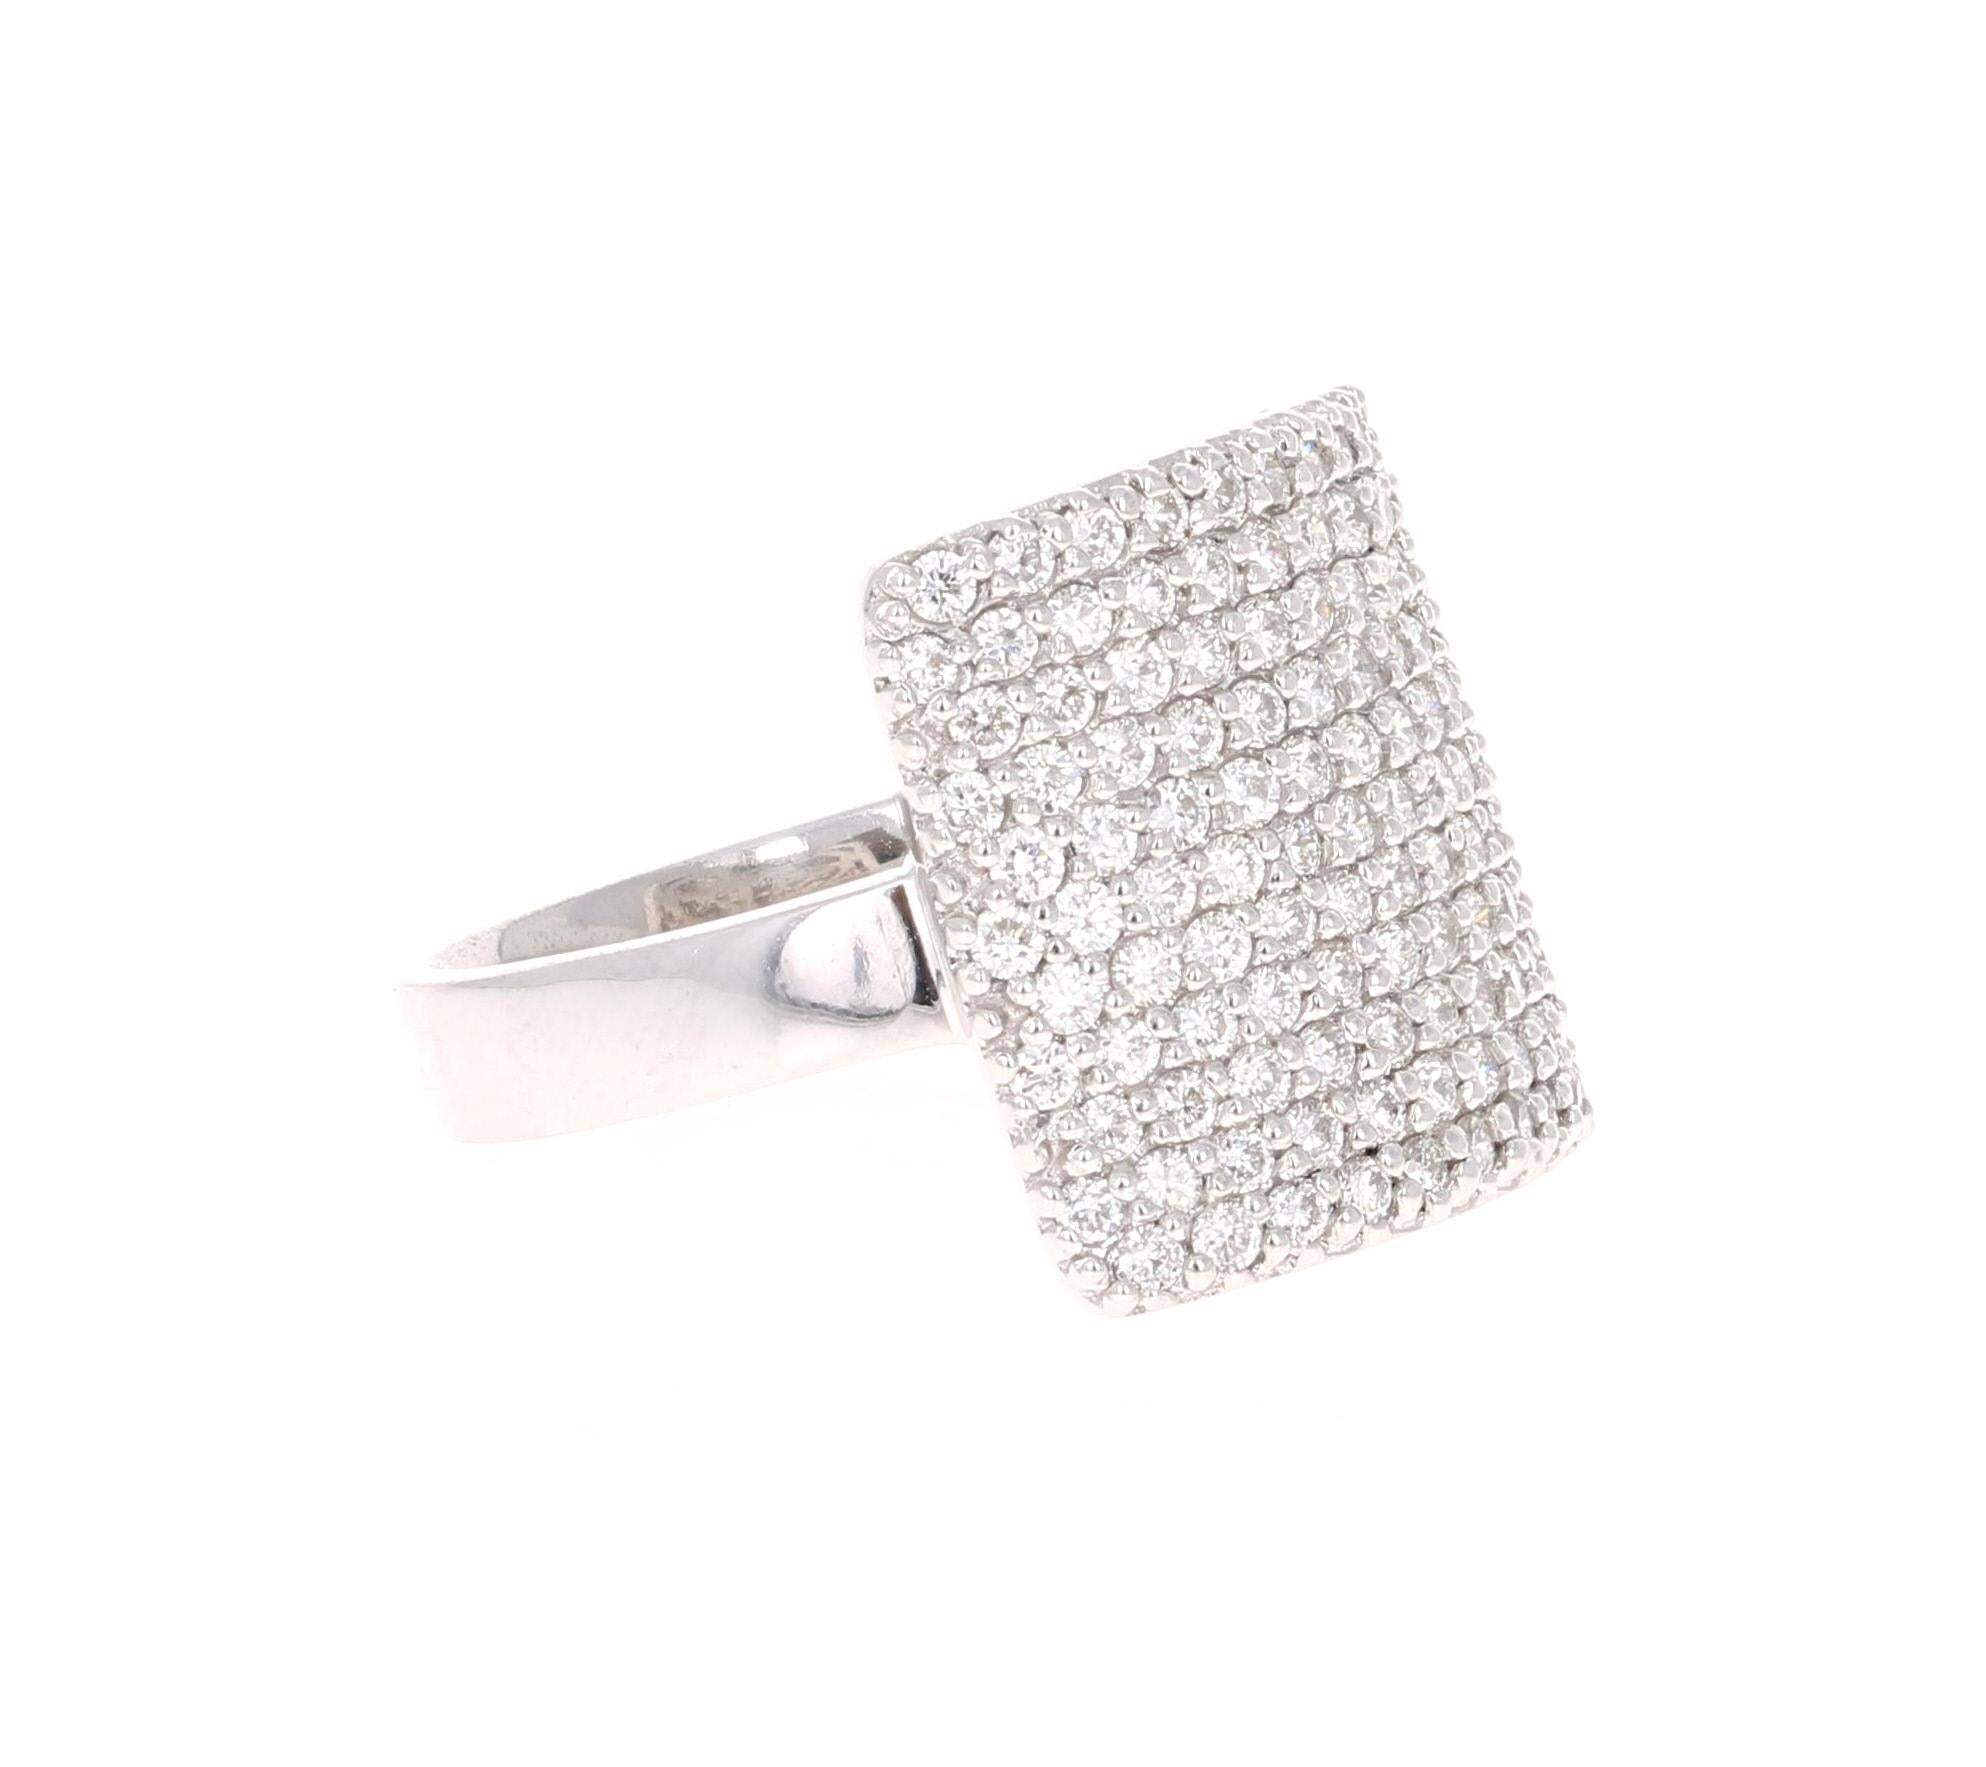 A simple cocktail/statement ring with a bold setting! Very much on trend with the modern day rings. A ring that screams #girlpower #bossbabe #bosslady for the independent and strong! 
Great as an everyday wear or as a special occasion ring.  
The